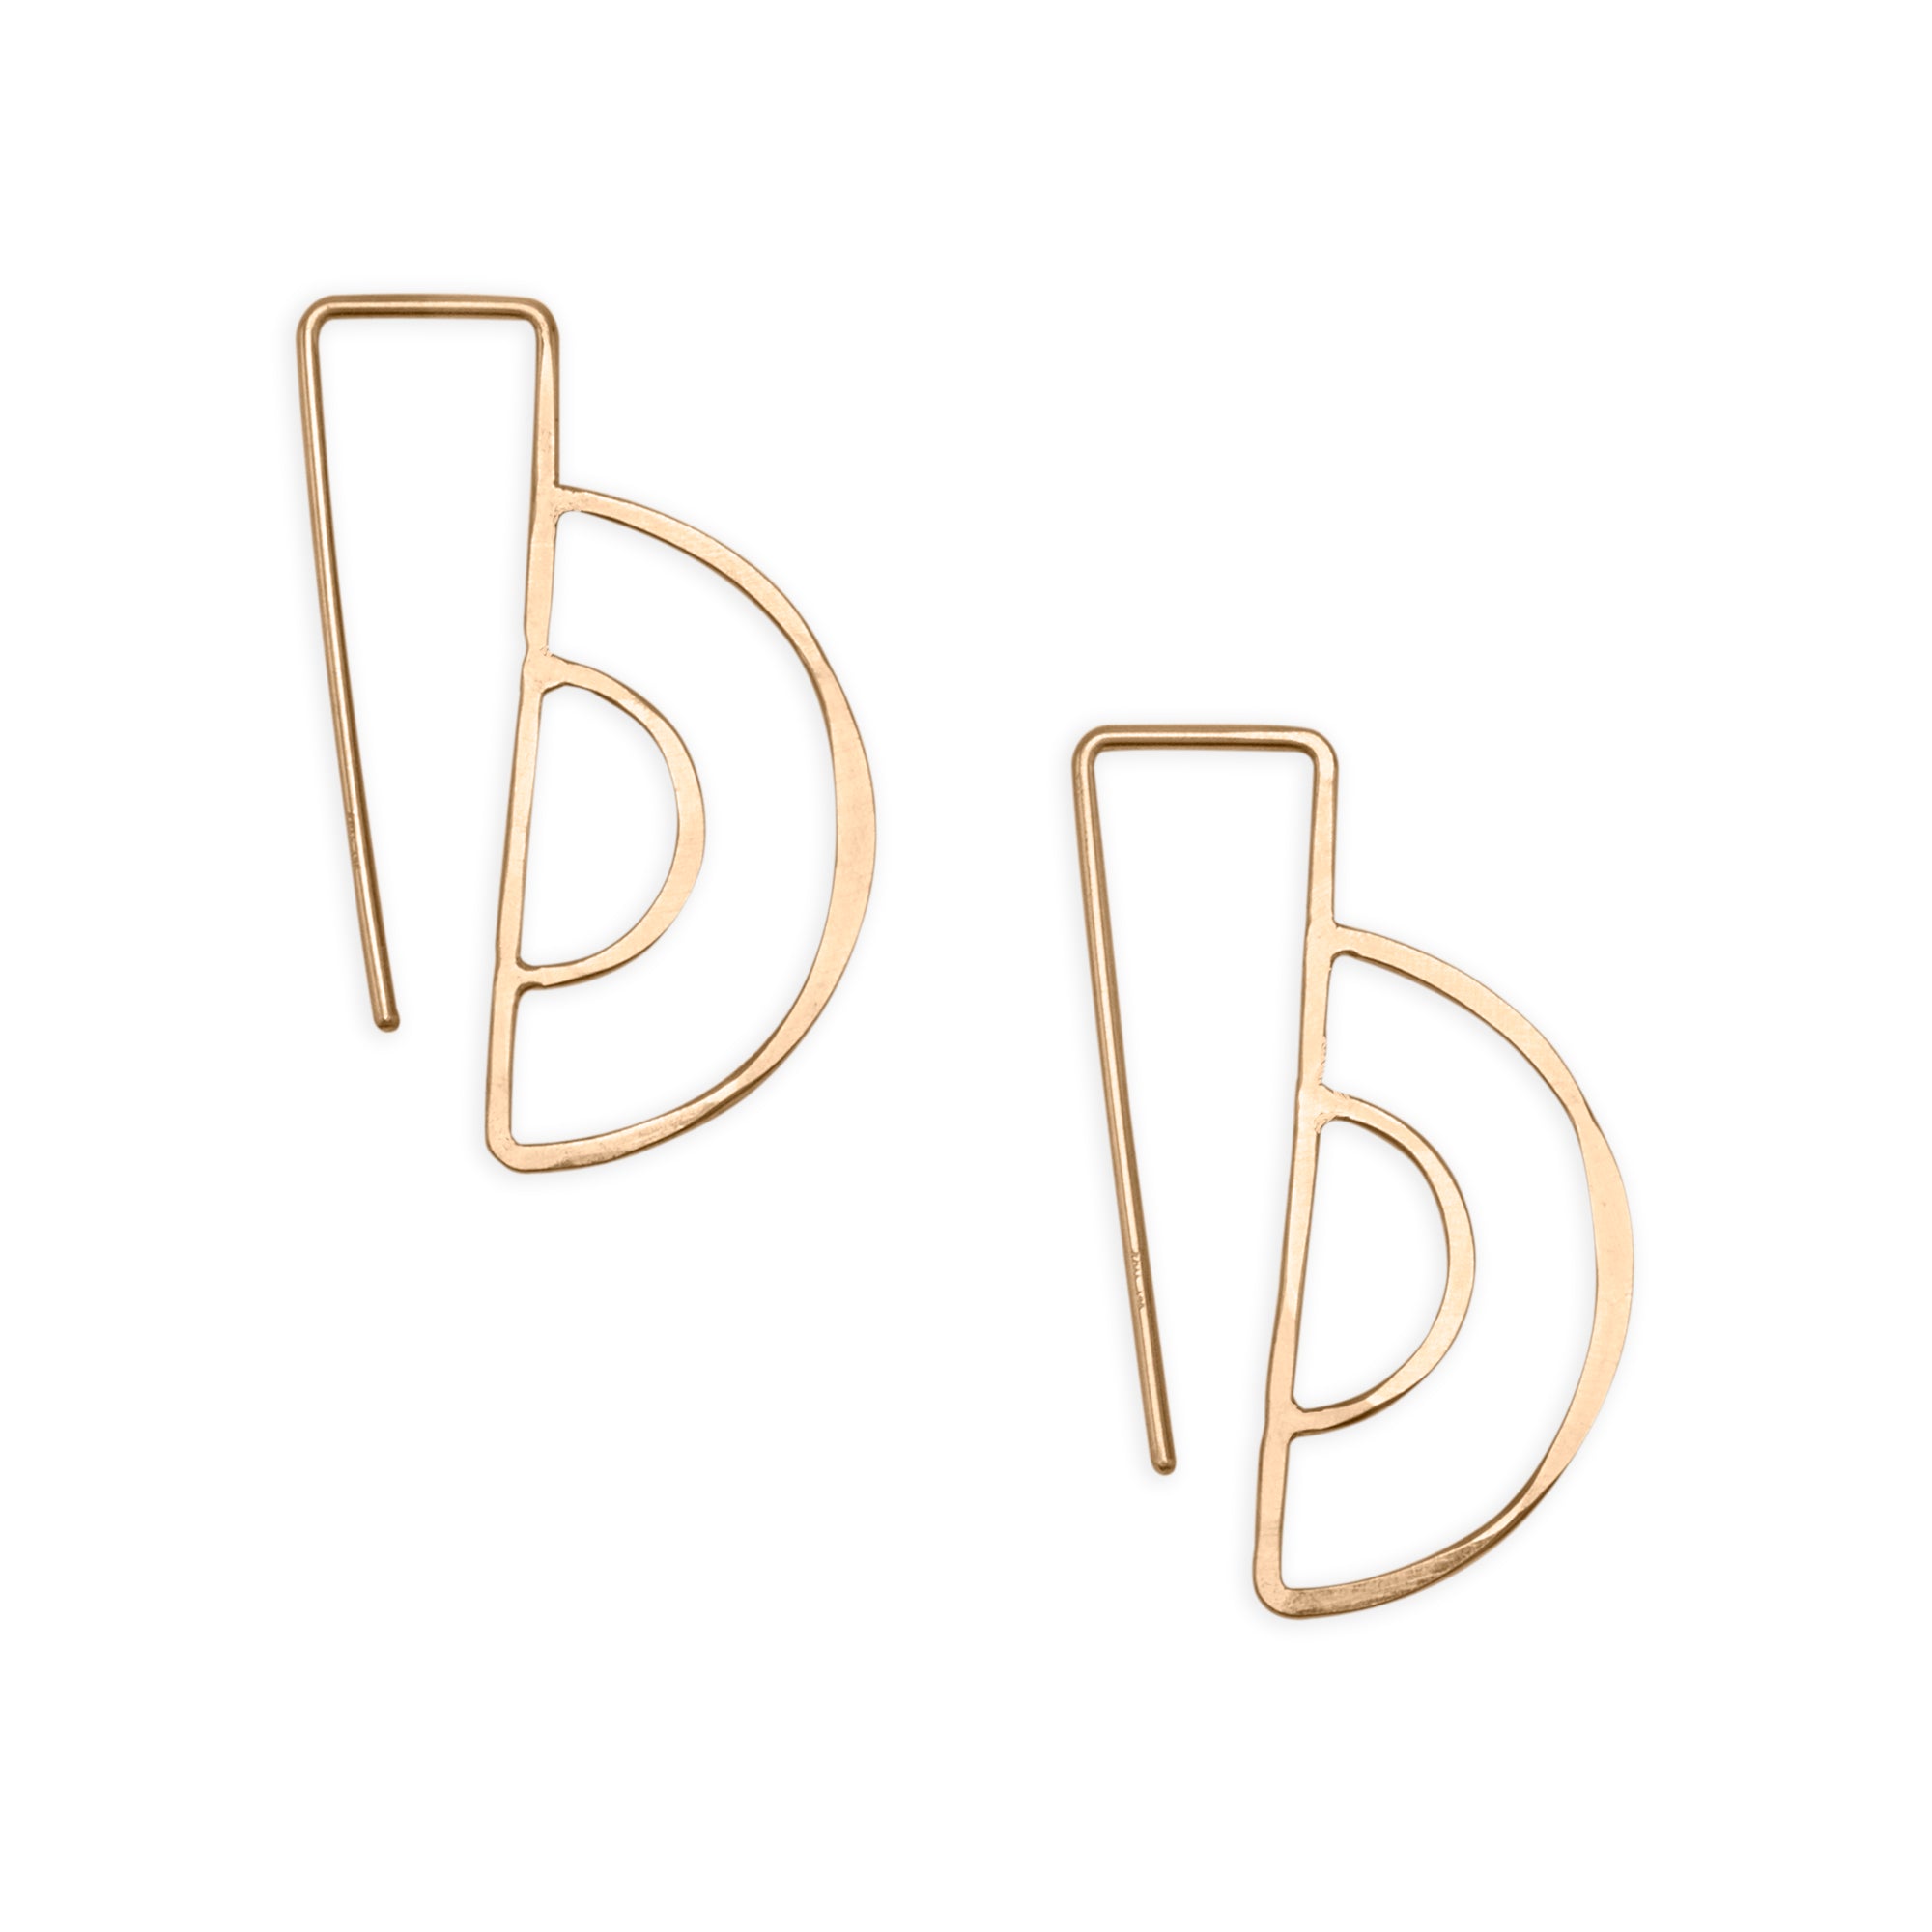 Parallel Hooks, delicate modern threader earrings in 14k gold, featuring hand forged double semicircles 